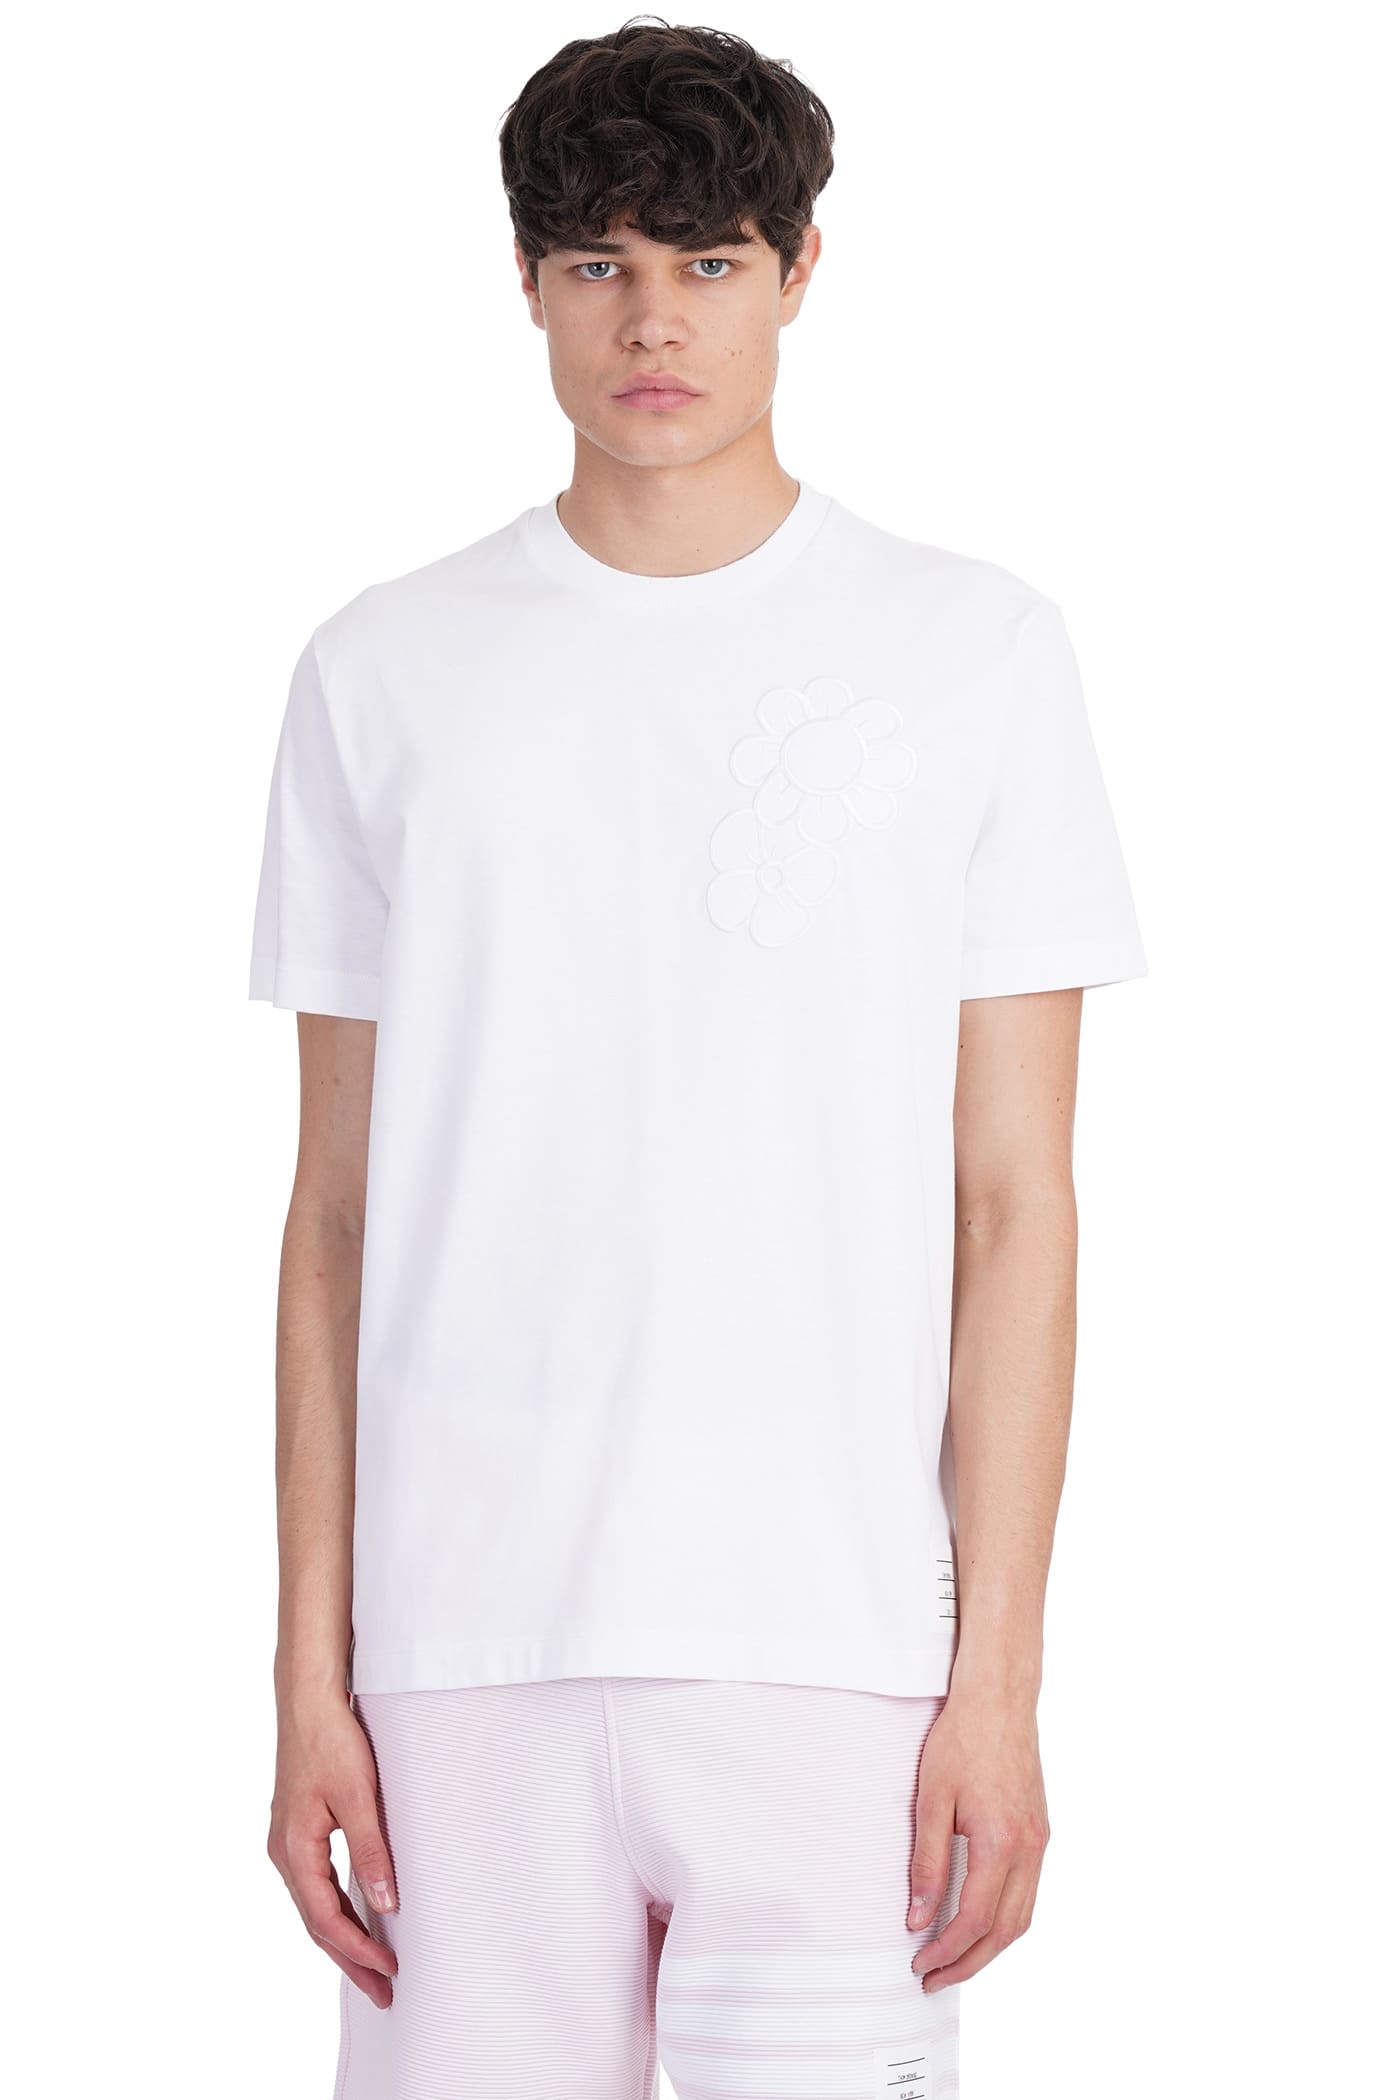 Thom Browne T-shirt In White Cotton